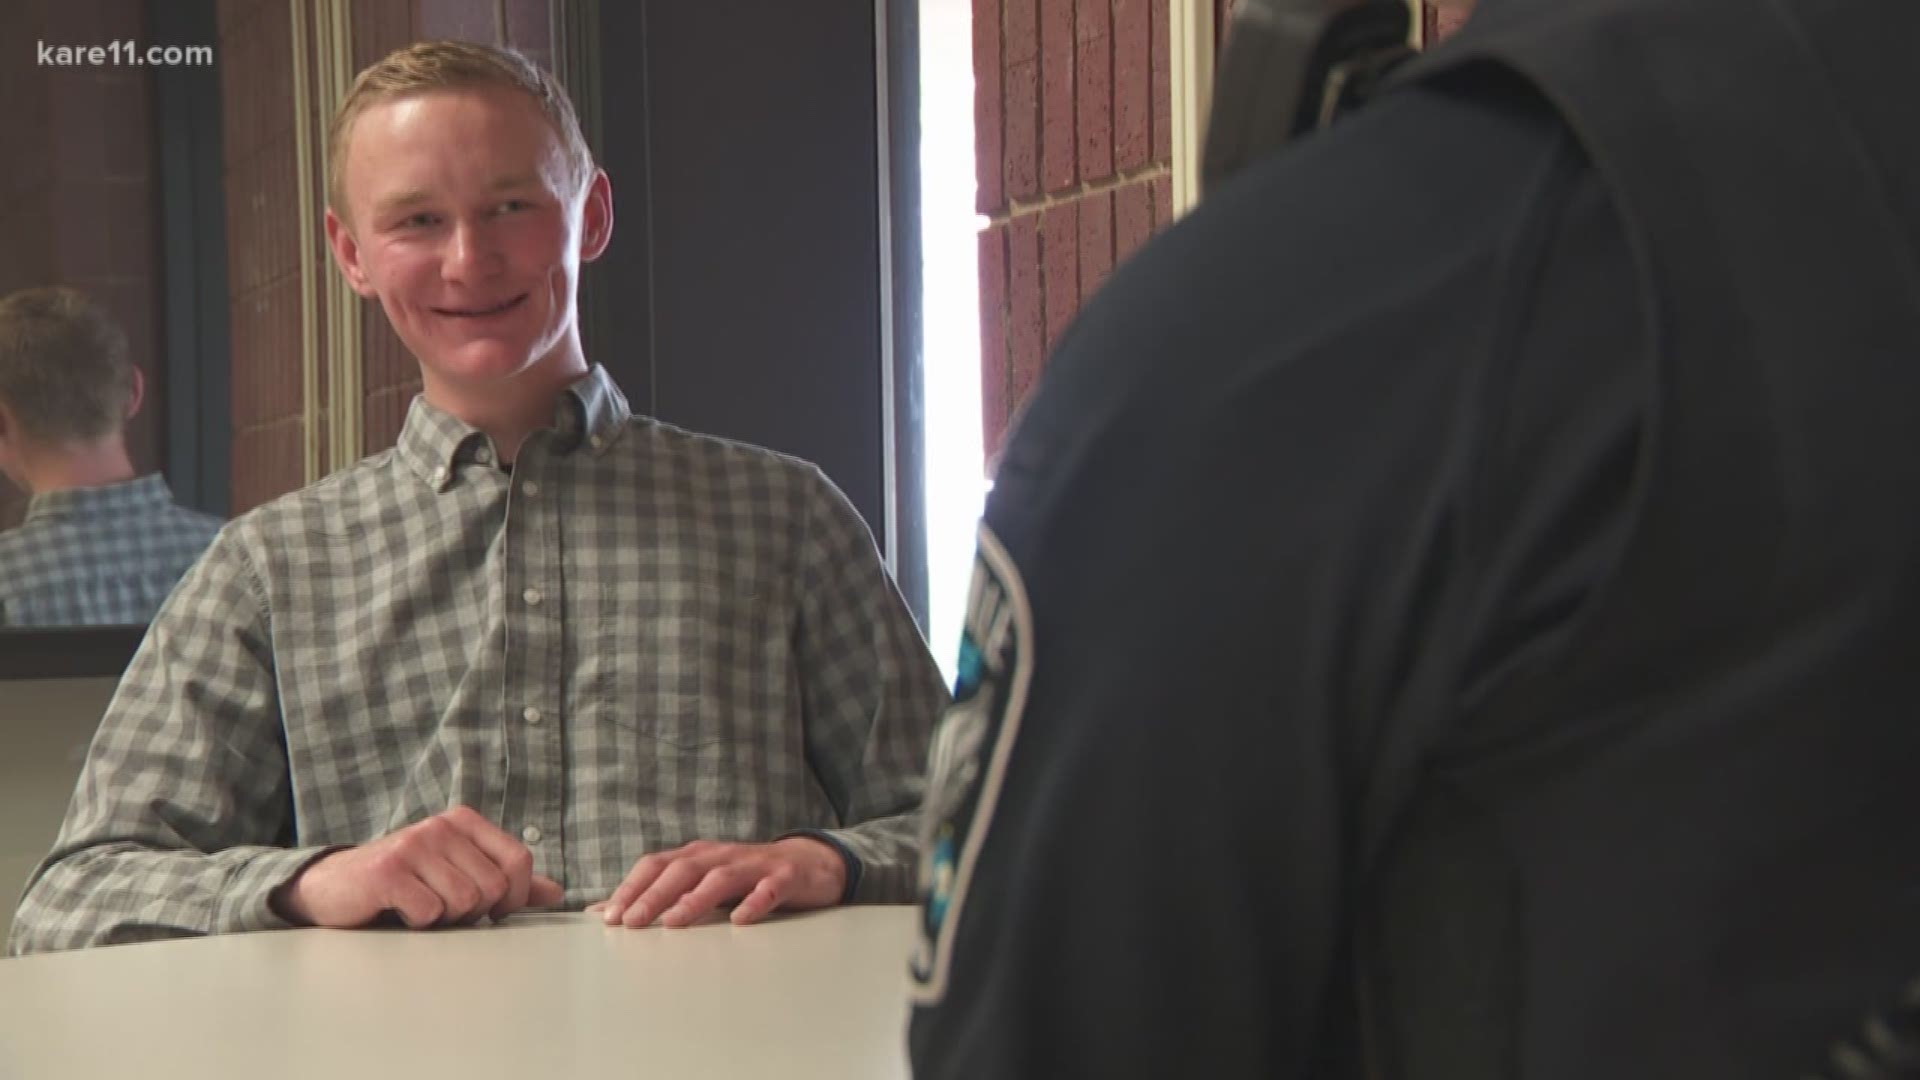 A Burnsville High School student is inviting people to talk with officers about their concerns and learn what it's like to have a job in law enforcement.
https://kare11.tv/2HIVnGy